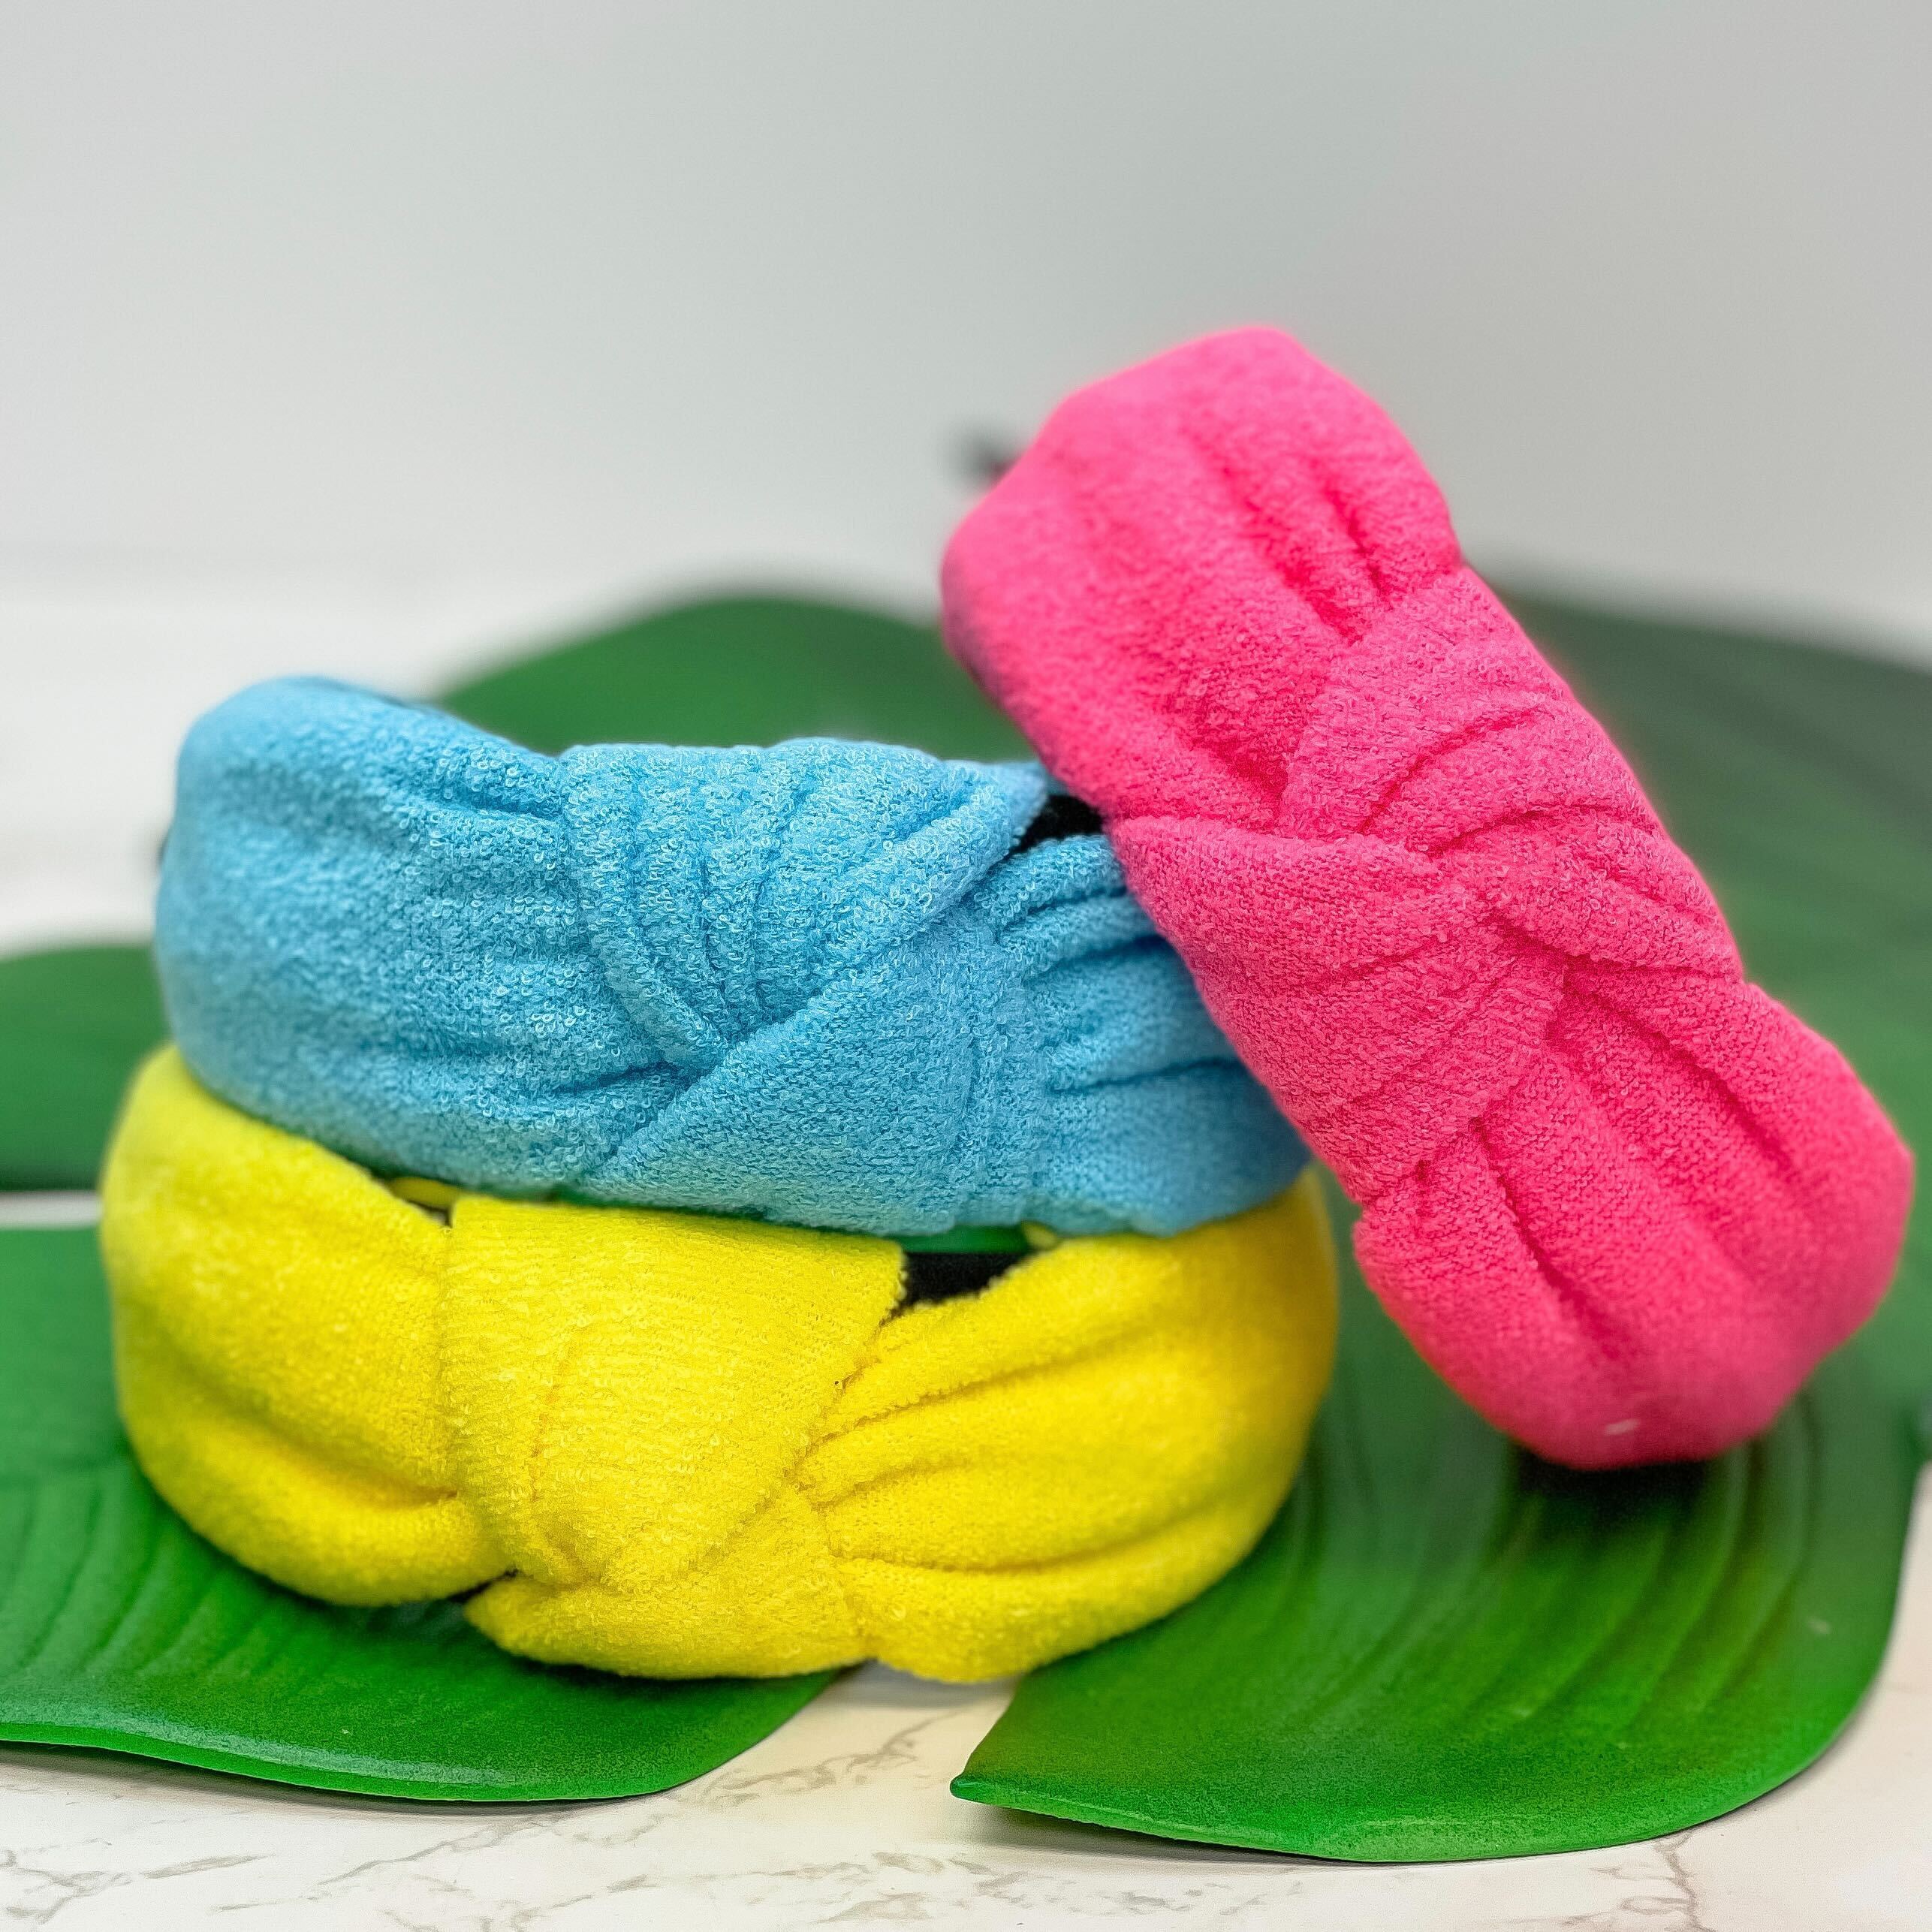 Neon Terry Knotted Headband - Yellow